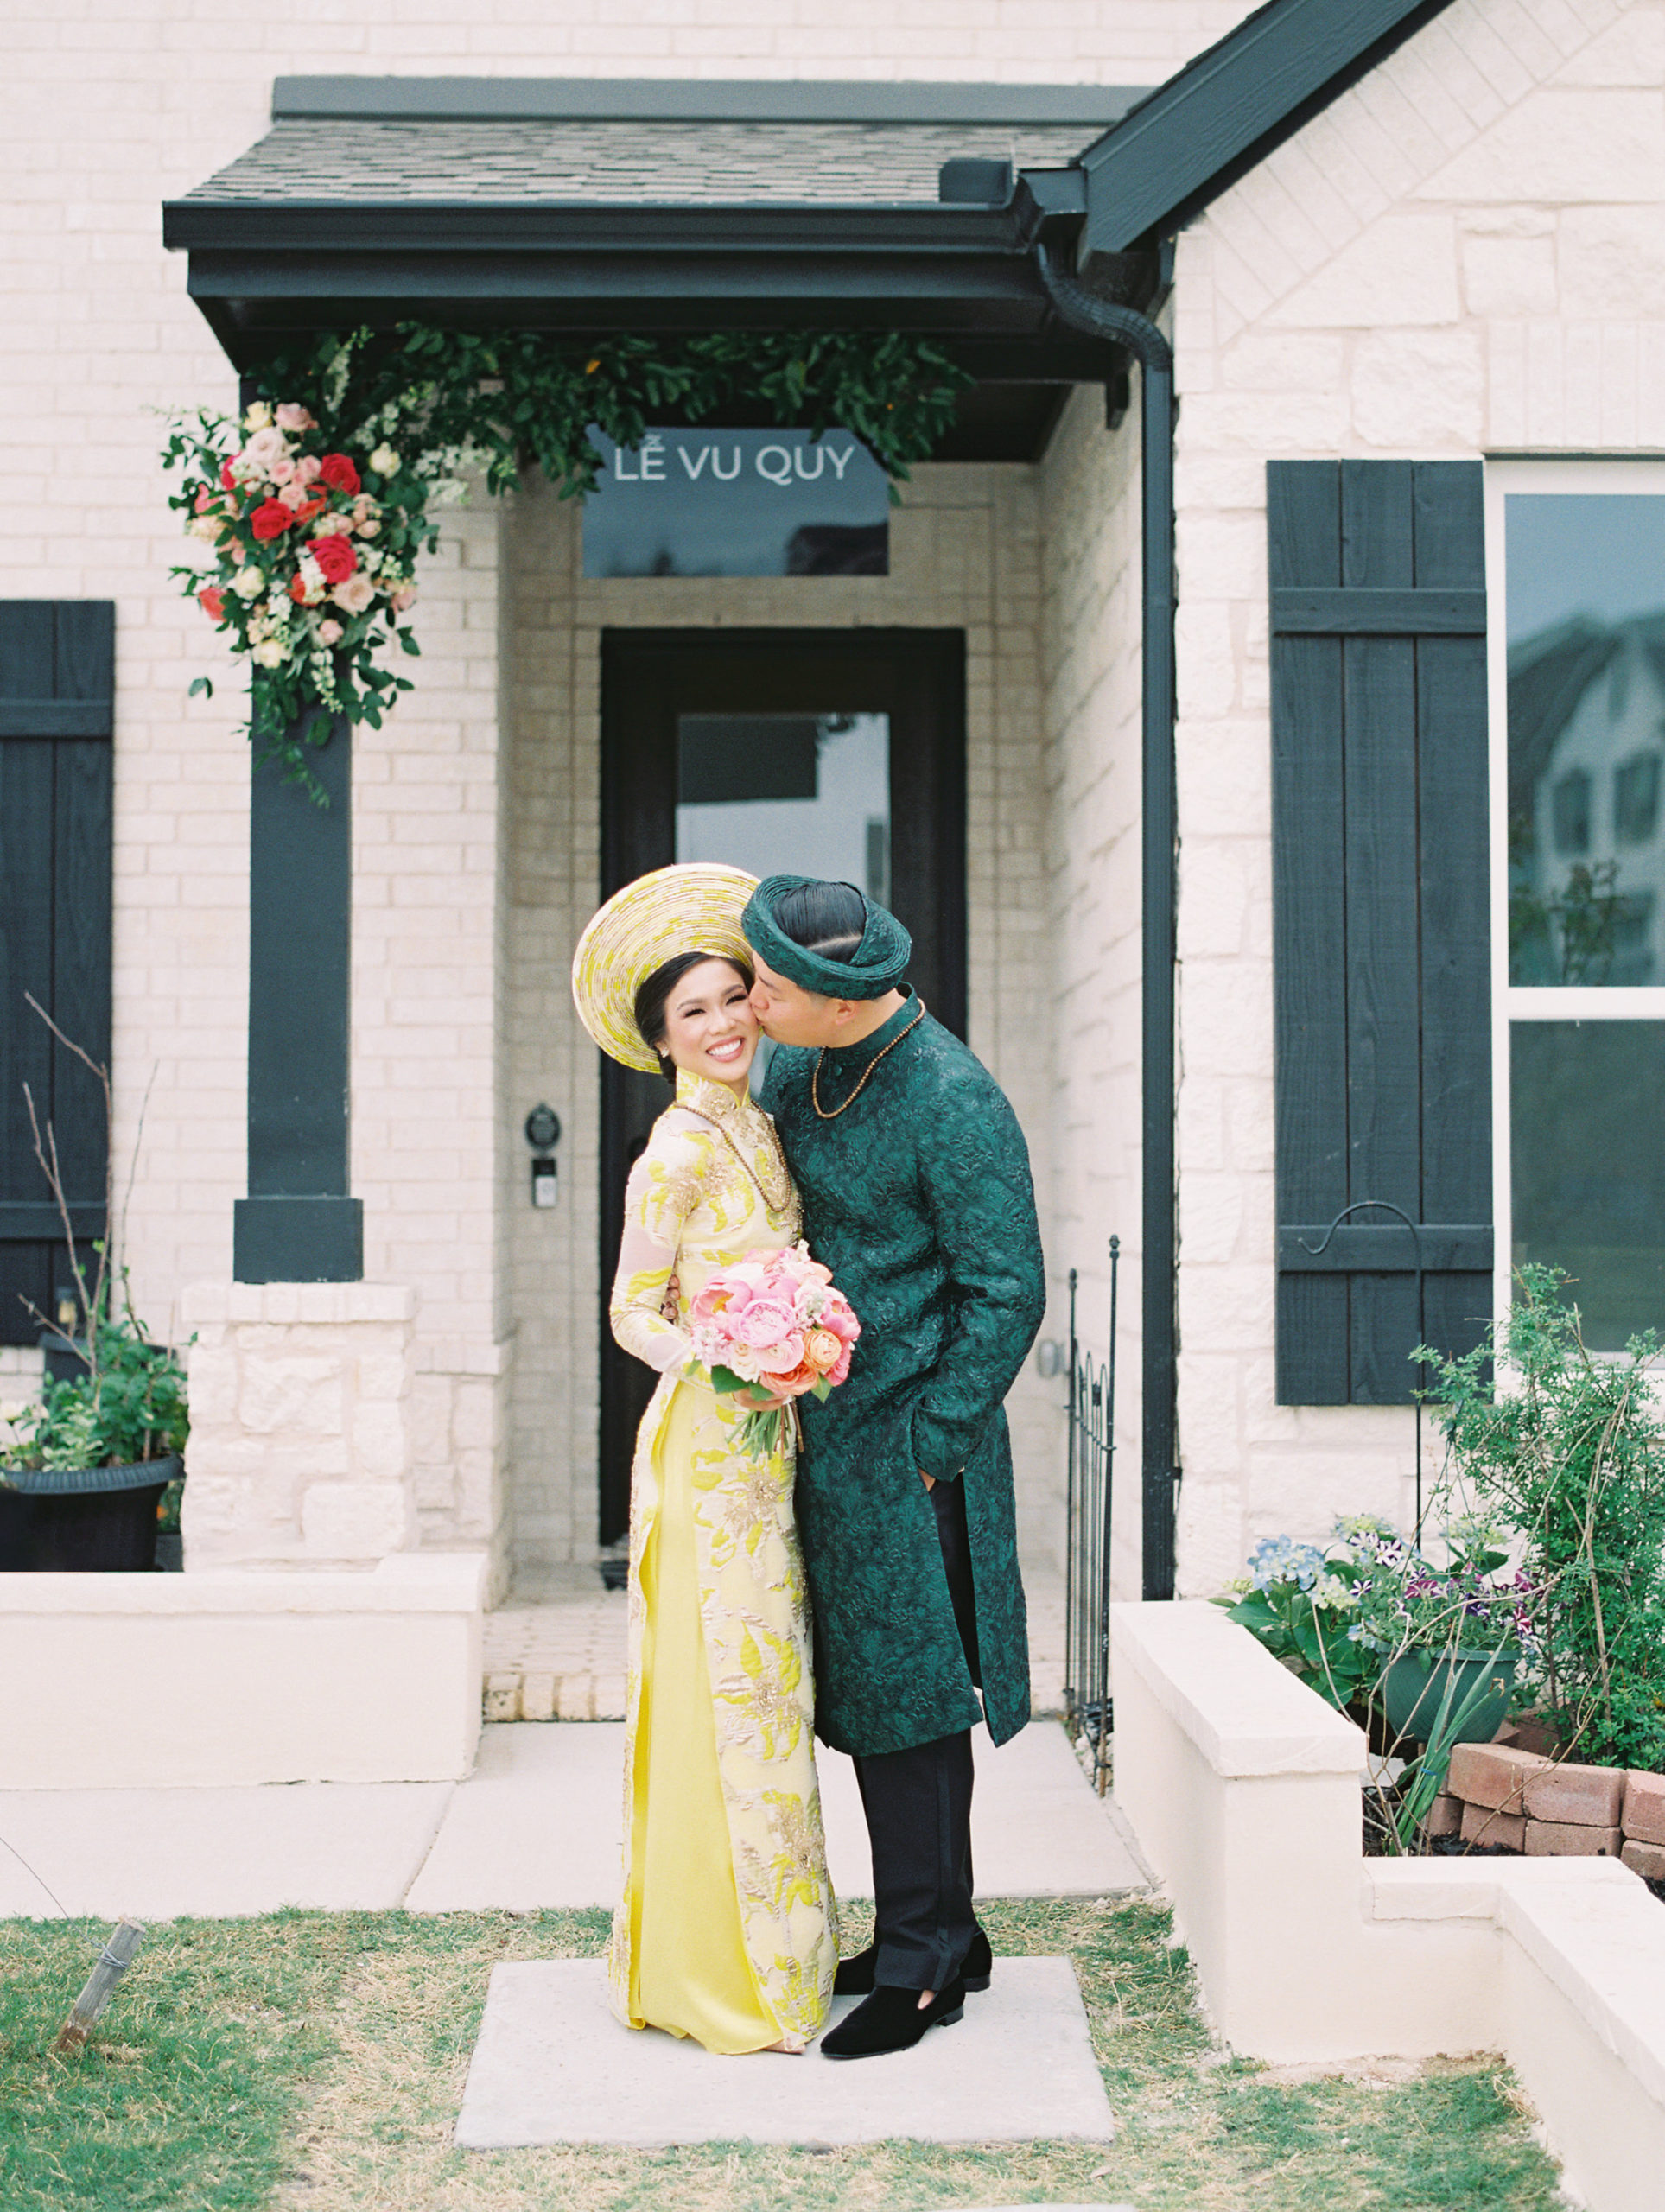 Vietnamese Wedding Traditions - Color & Chic